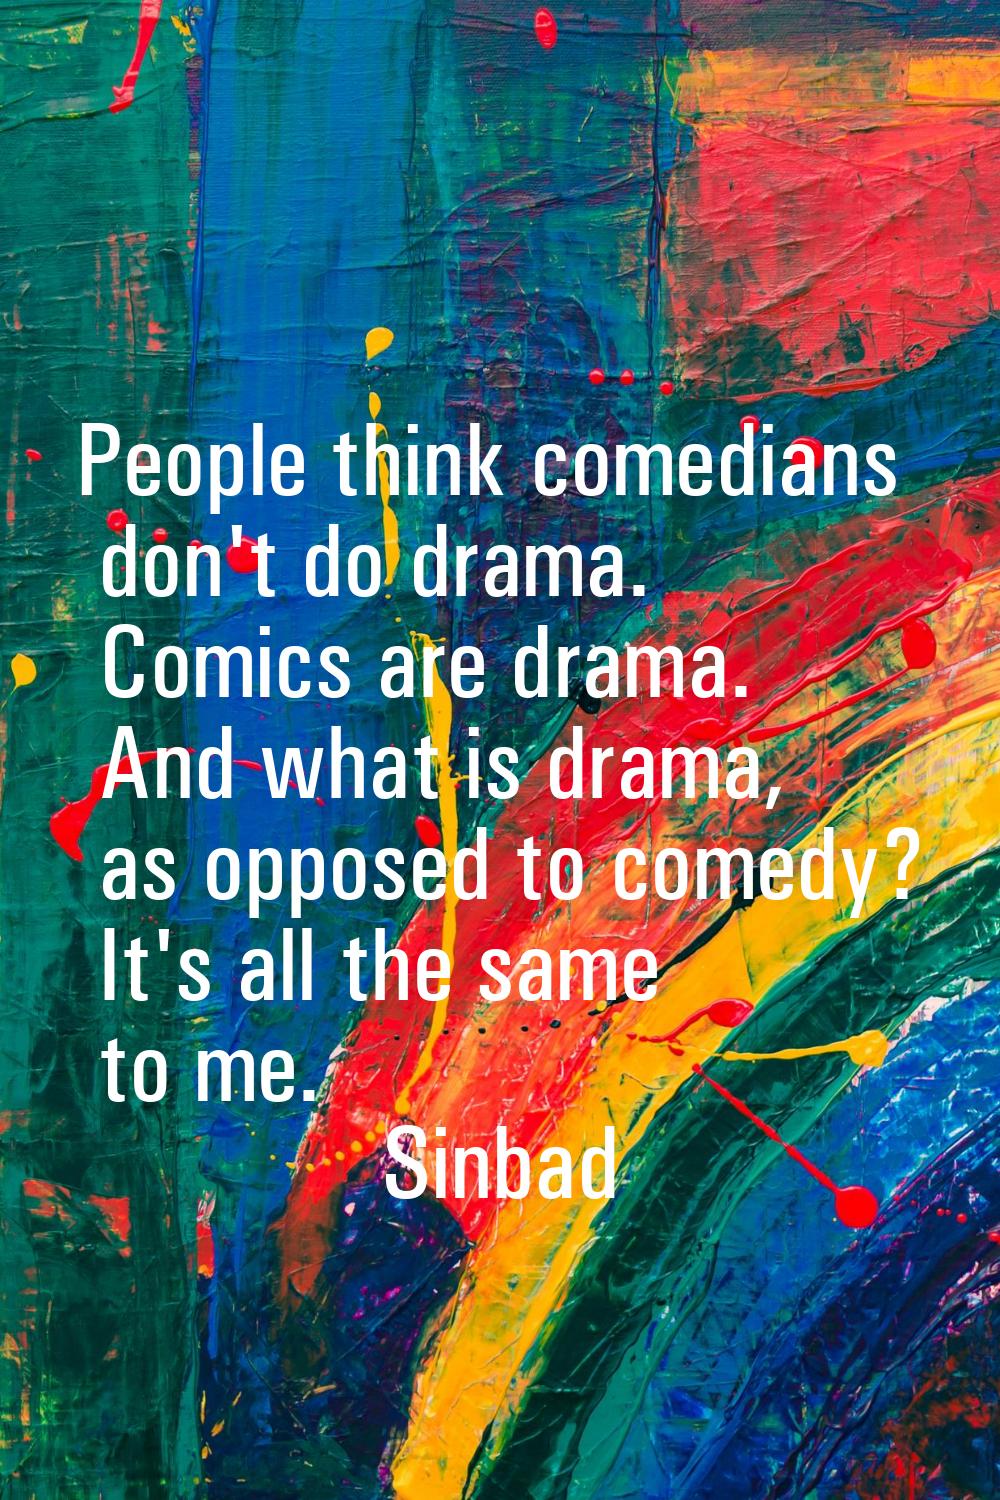 People think comedians don't do drama. Comics are drama. And what is drama, as opposed to comedy? I